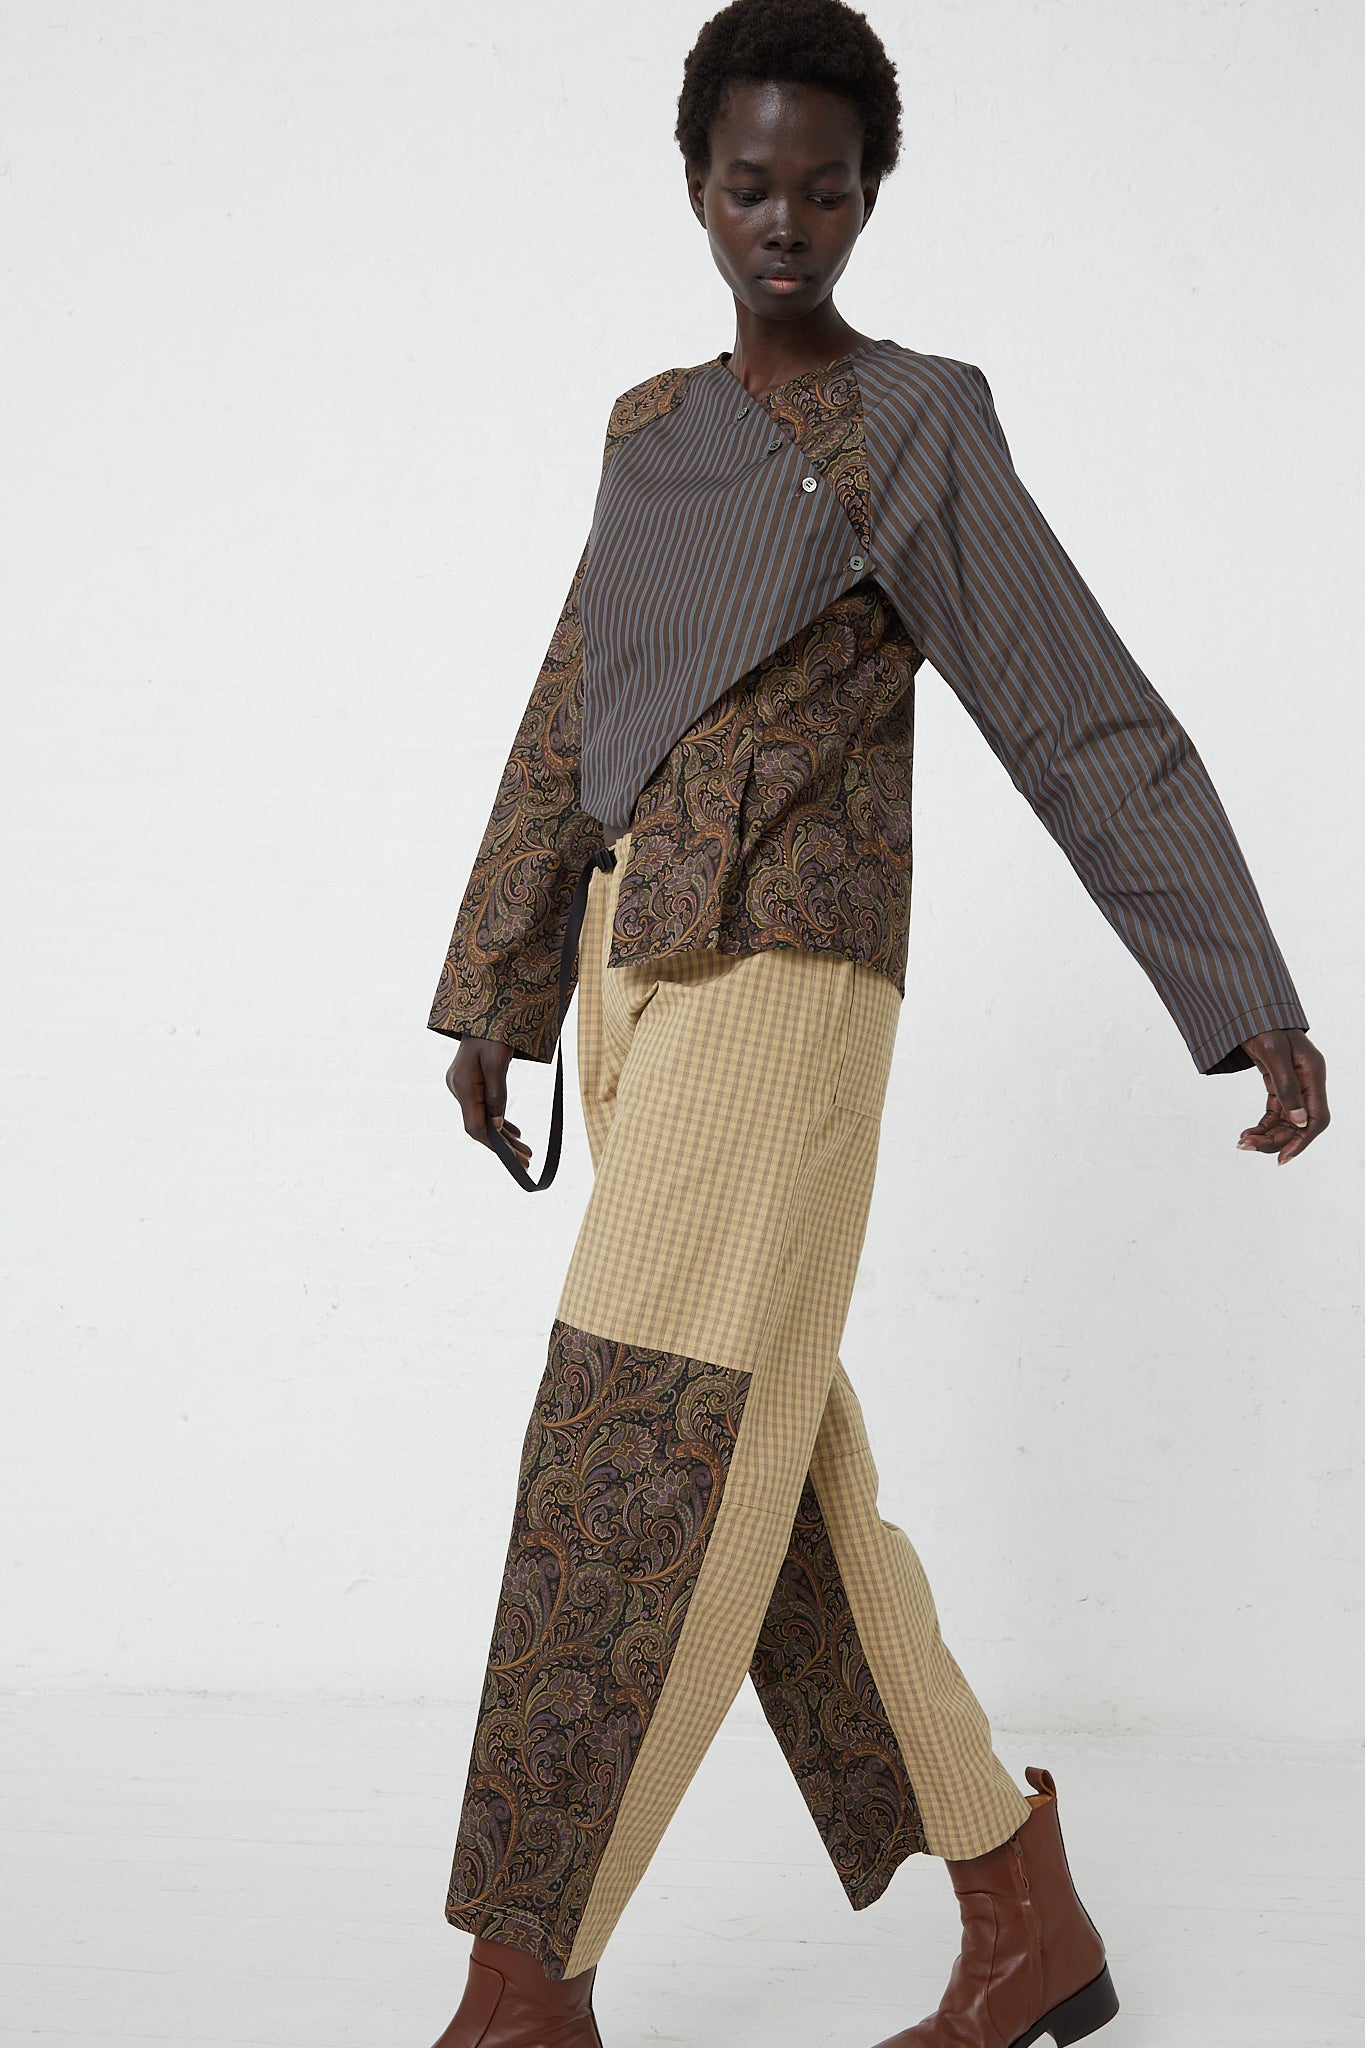 A woman in a brown and tan outfit walking on a white floor, showcasing her SC103 Check Cotton Domain Pant in Tent.